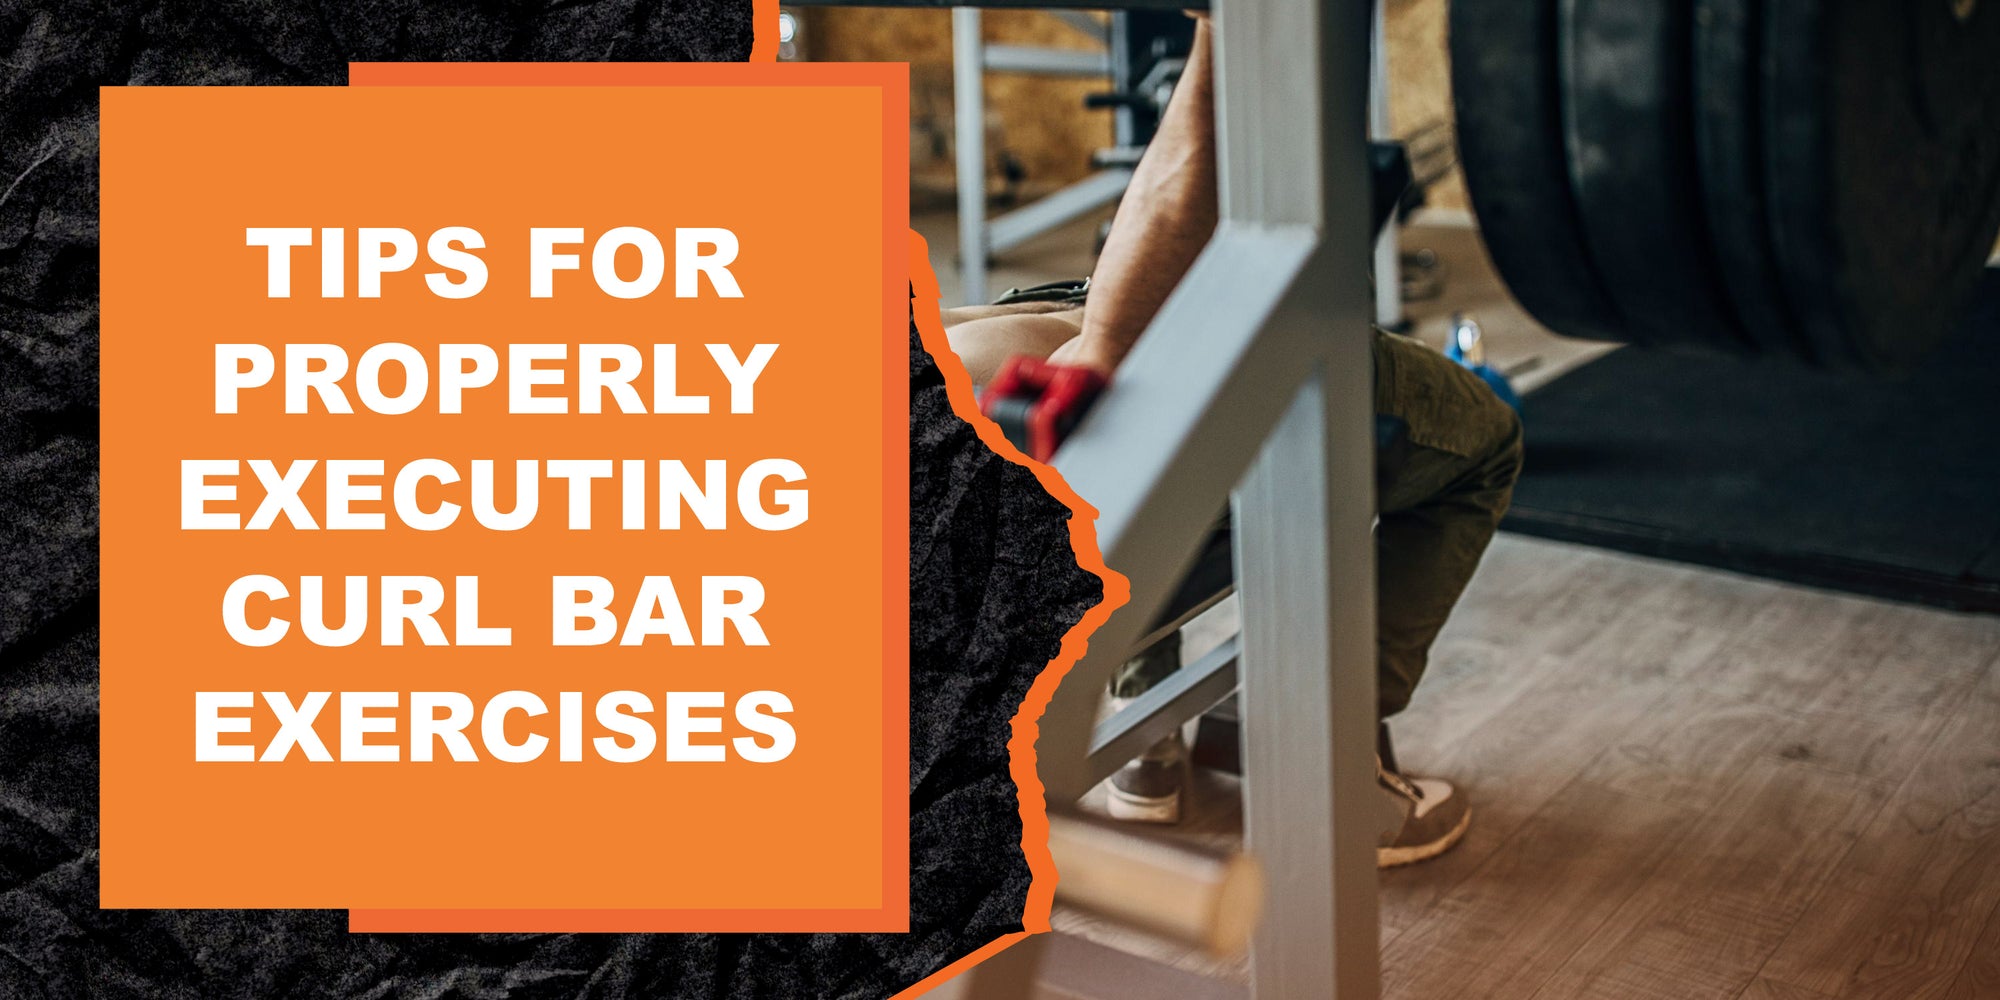 Tips for Properly Executing Curl Bar Exercises